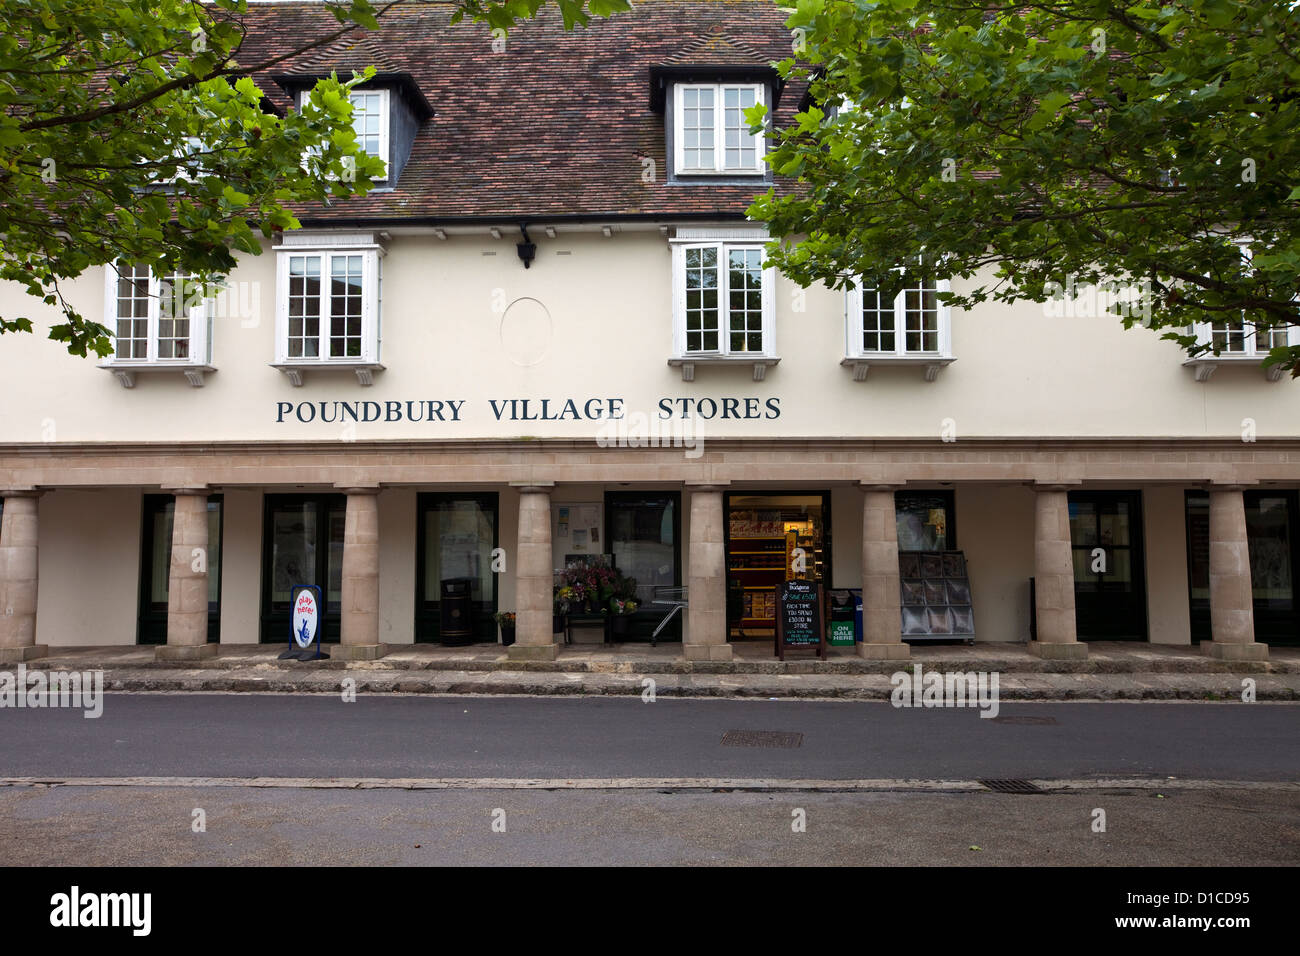 A traditionally styled village shop in Poundbury. The town is inspired by the The Prince of Wales’, ‘A Vision of Britain' Stock Photo